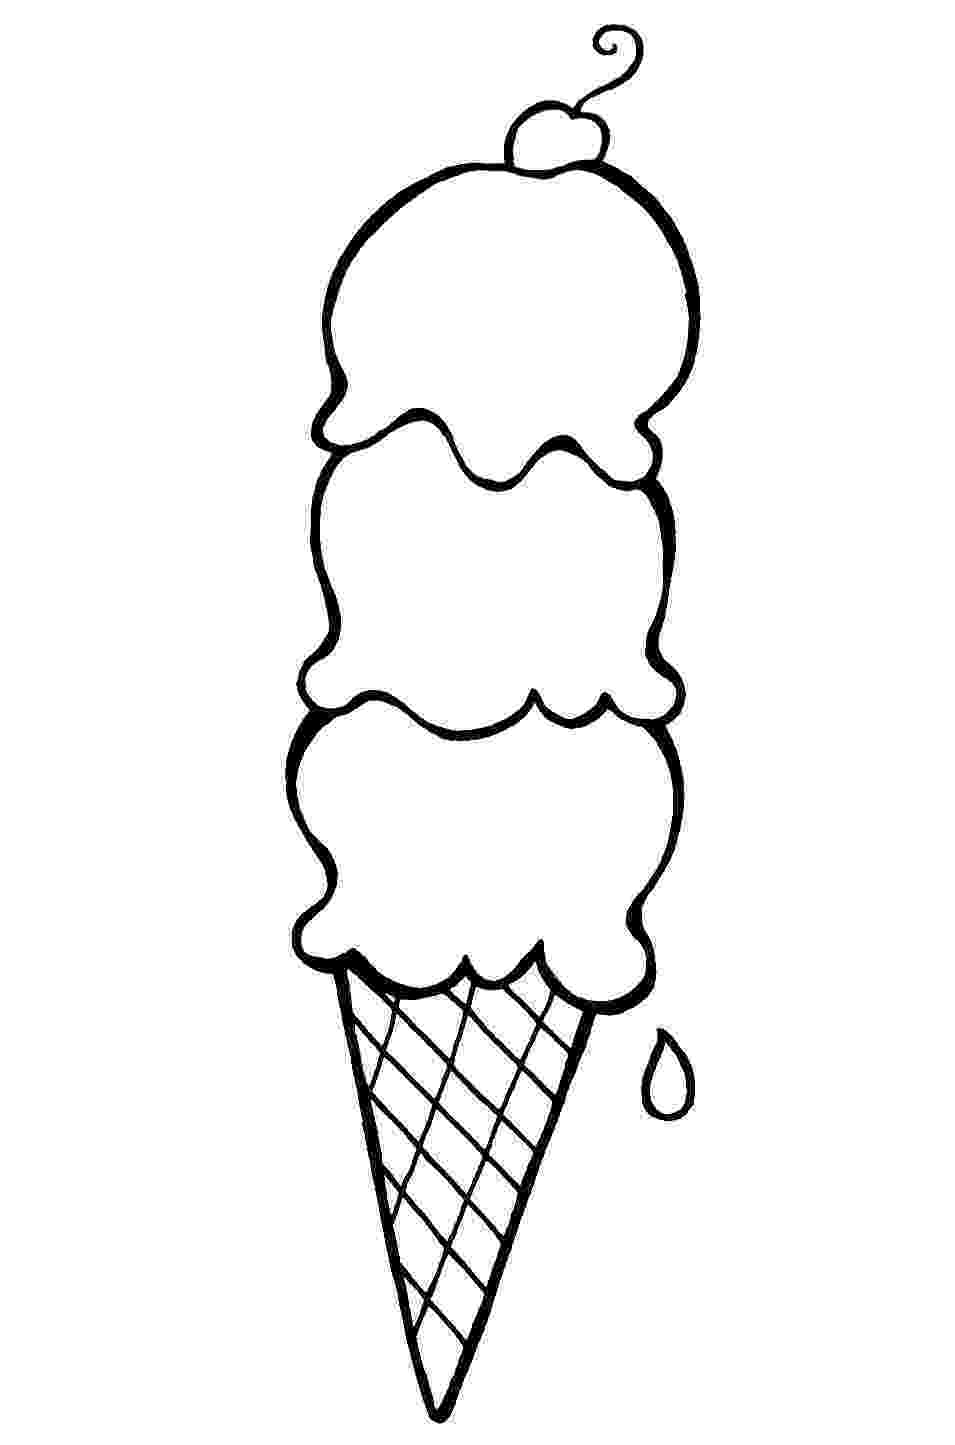 ice cream cone coloring page coloring pages for kids ice cream coloring pages page coloring cream ice cone 